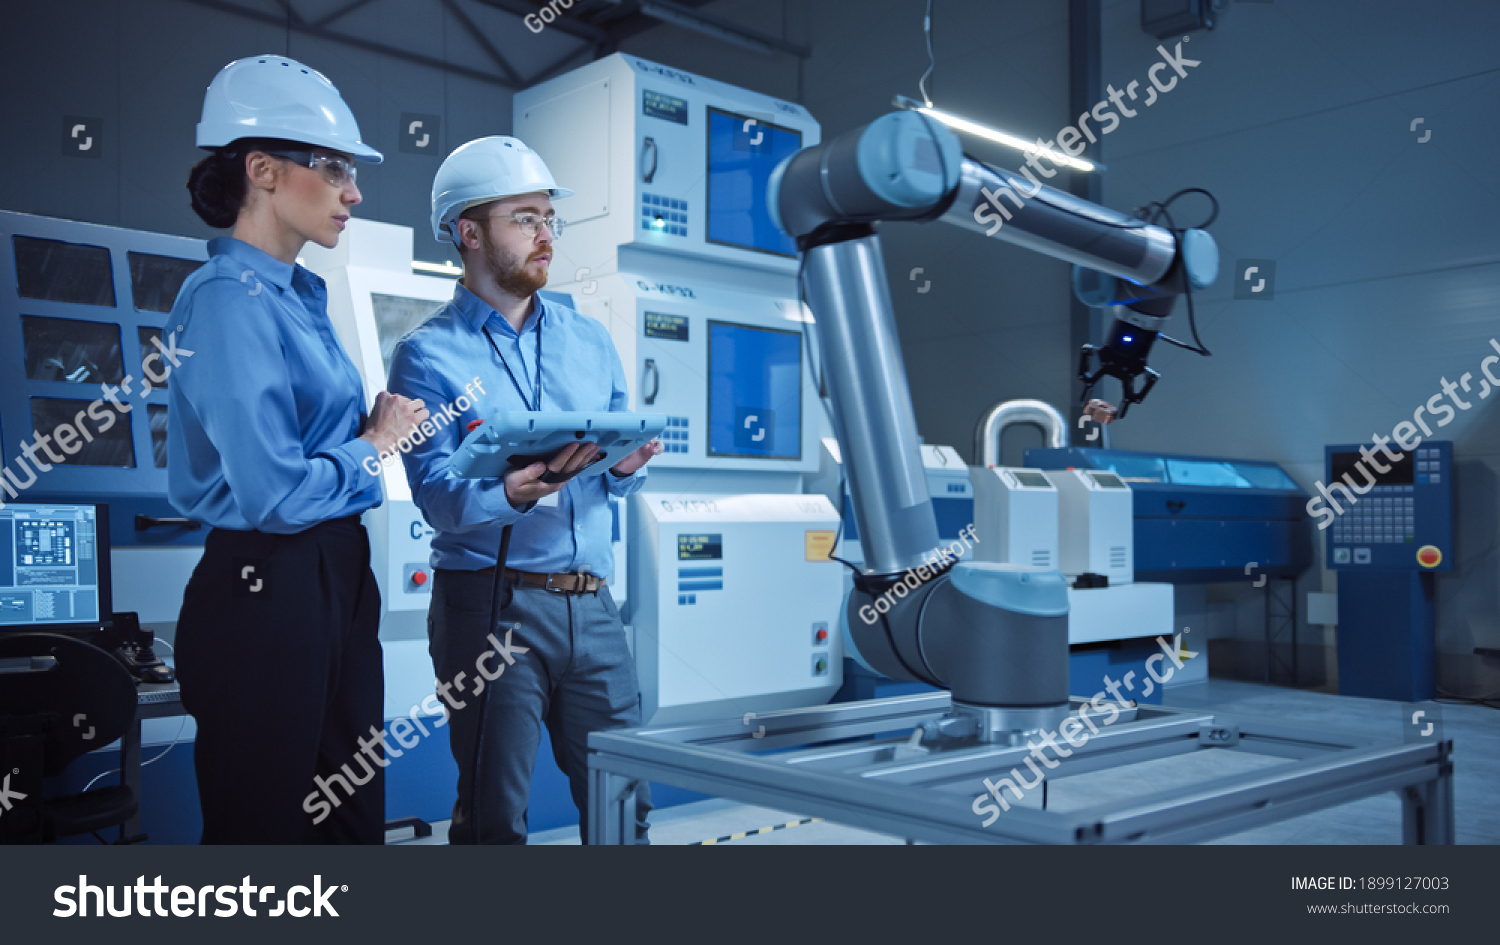 Factory Workshop: Professional Female Engineer, Male Machinery Operator Use Industrial Digital Tablet Computer to Work and Program Robot Arm for Production Line. High-Tech Facility with CNC Machines #1899127003